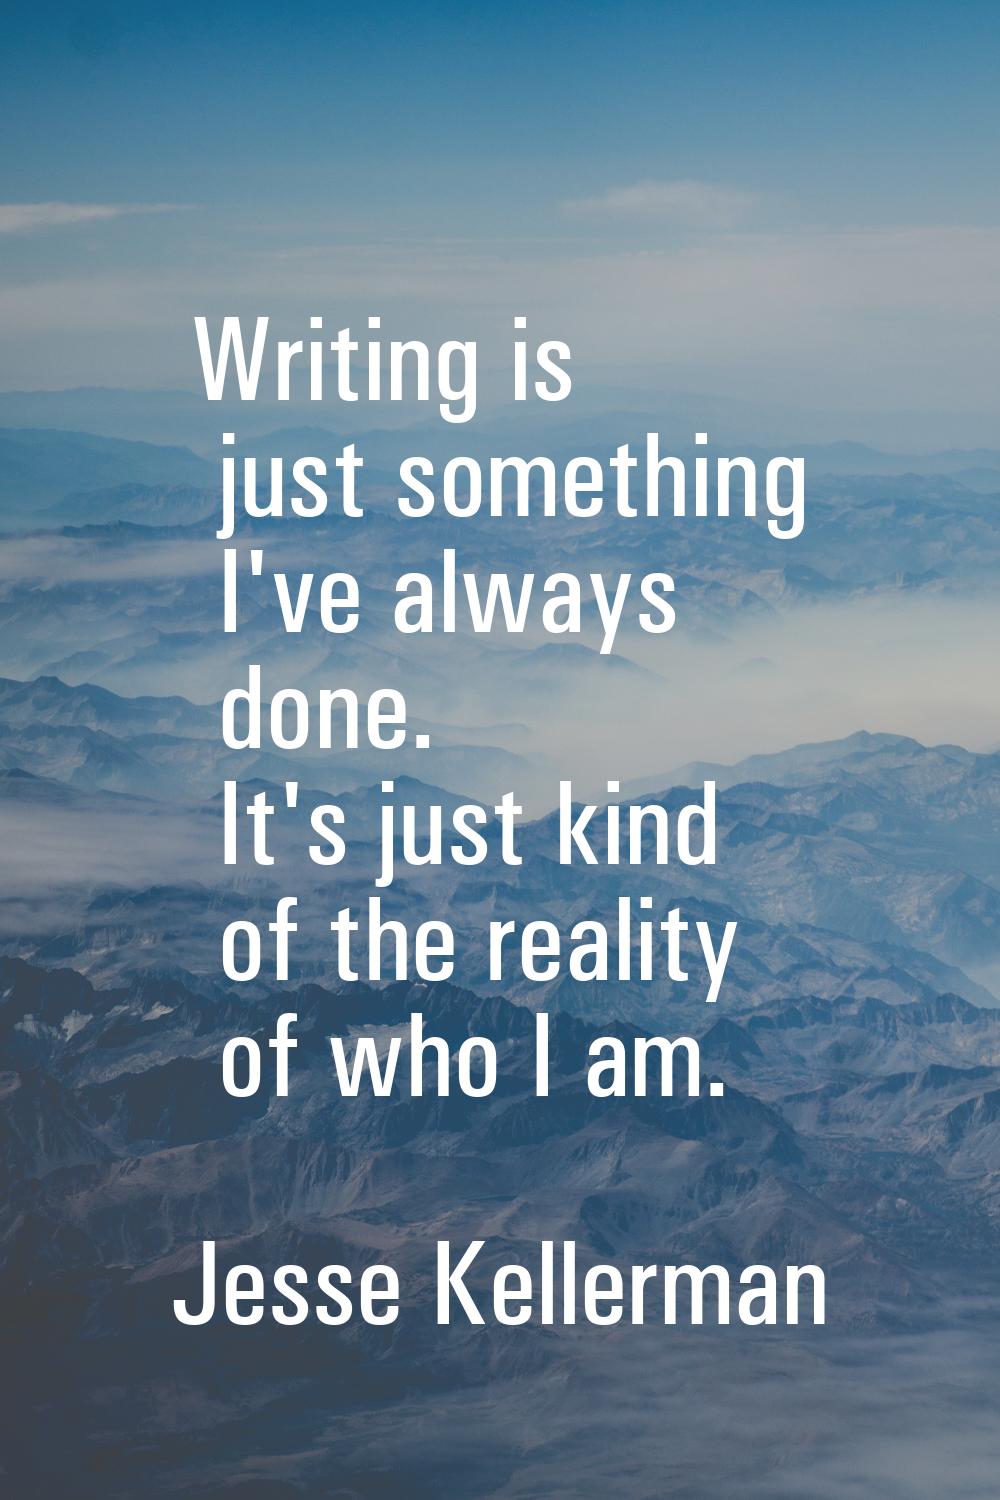 Writing is just something I've always done. It's just kind of the reality of who I am.